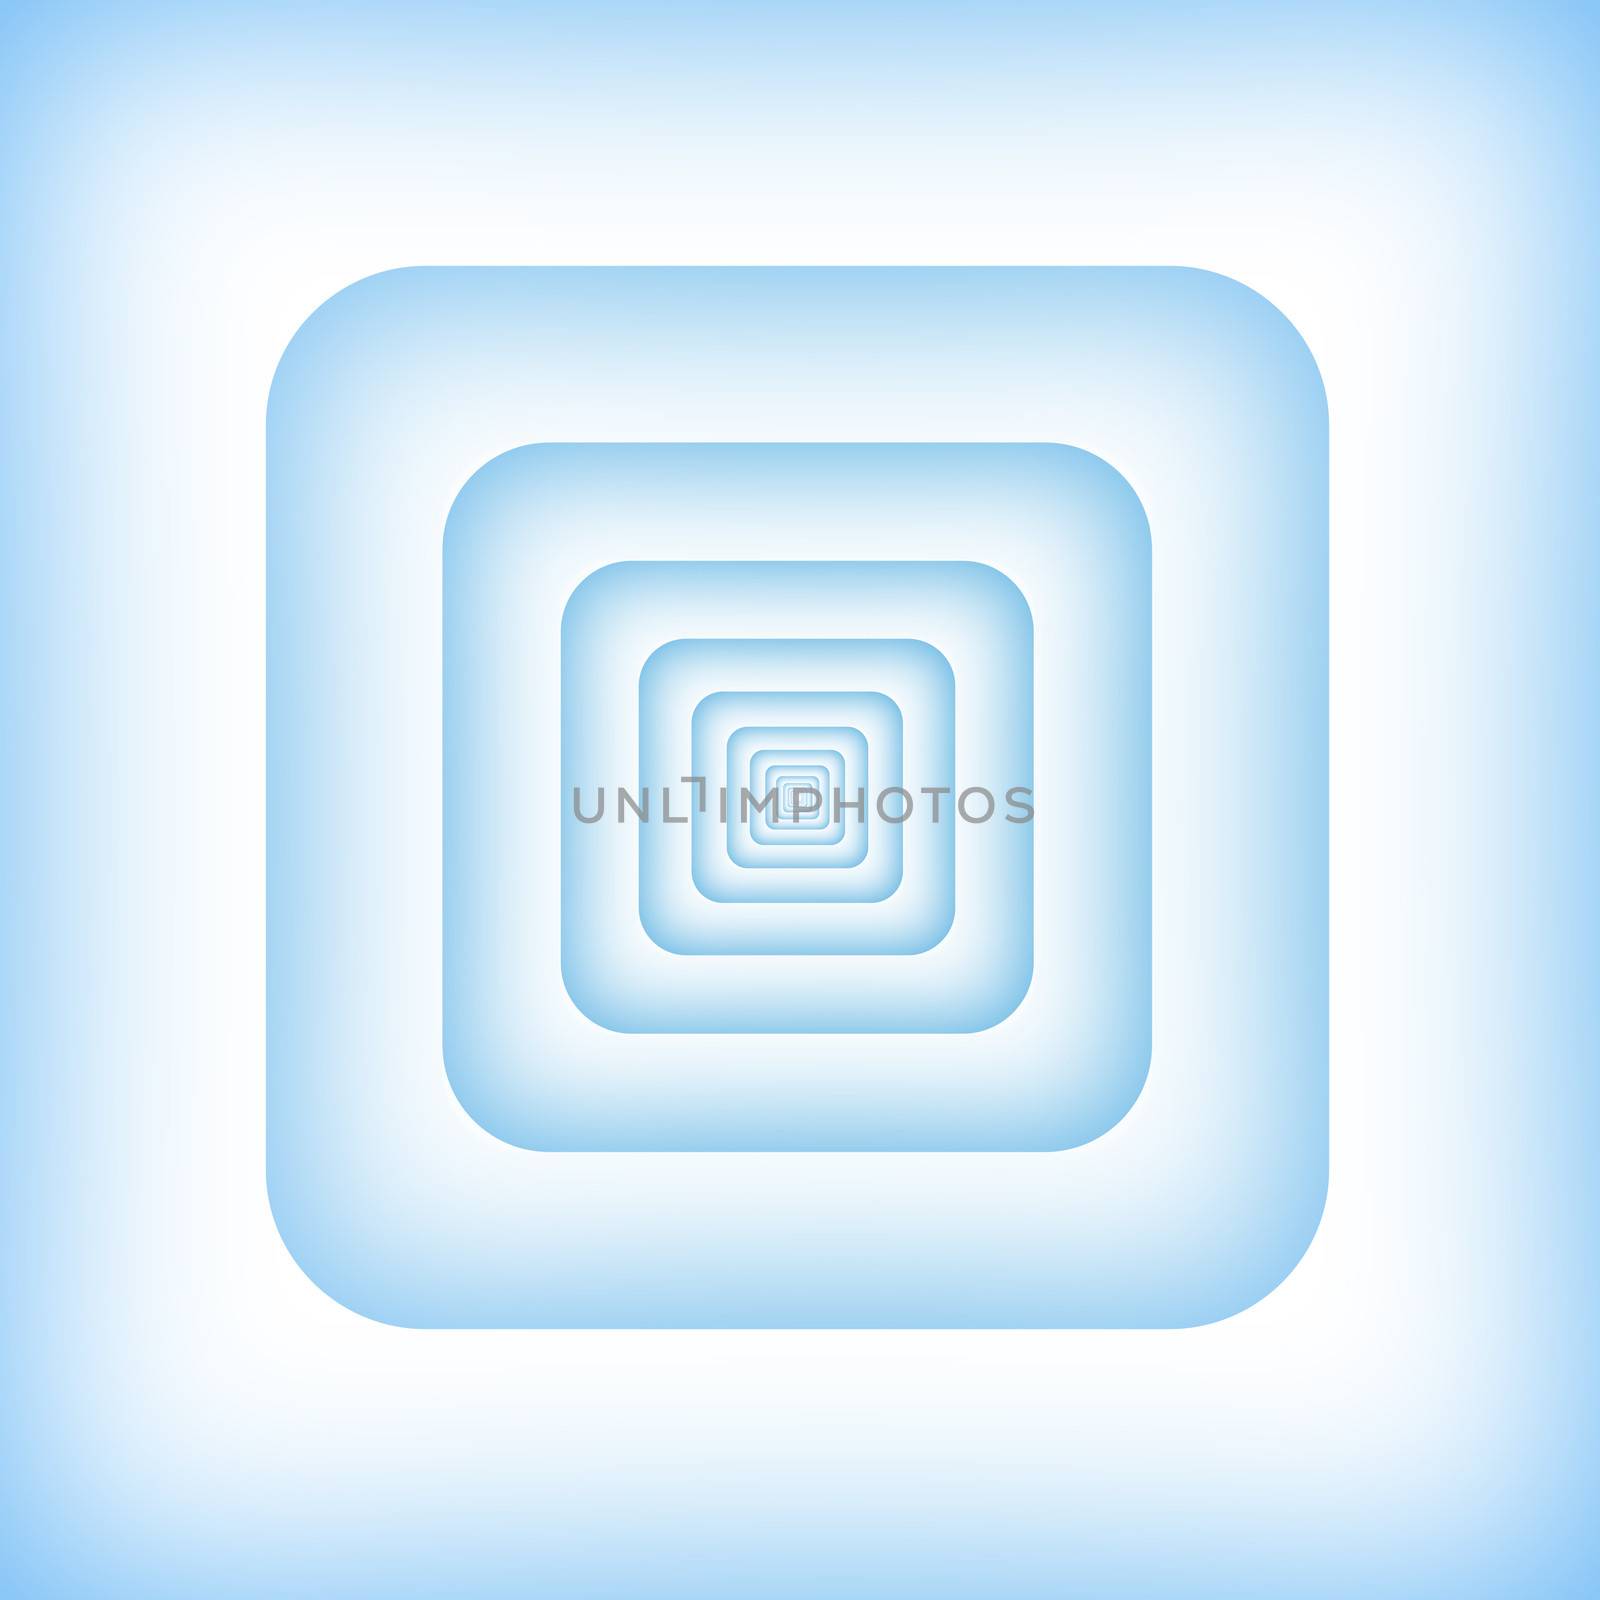 Abstract futuristic background. Blue rectangles by cherezoff